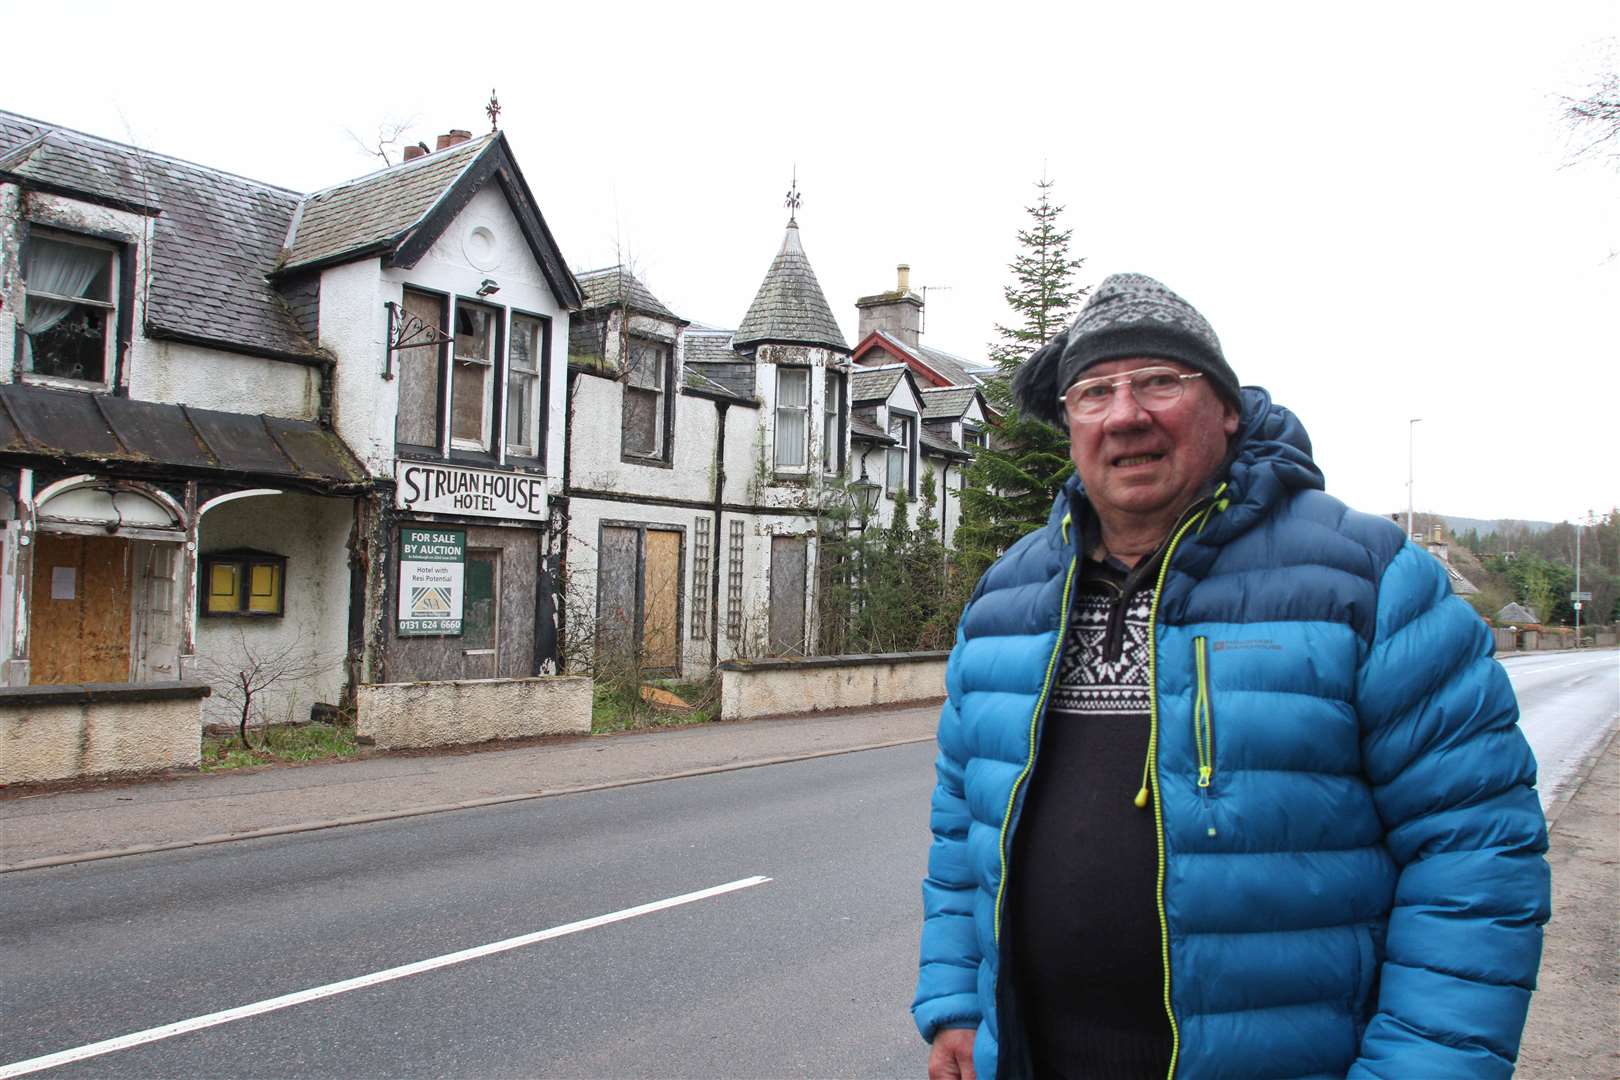 Willie McKenna wants the importance of the Struan House Hotel to the development of Scottish skiing to be recognised at the site.